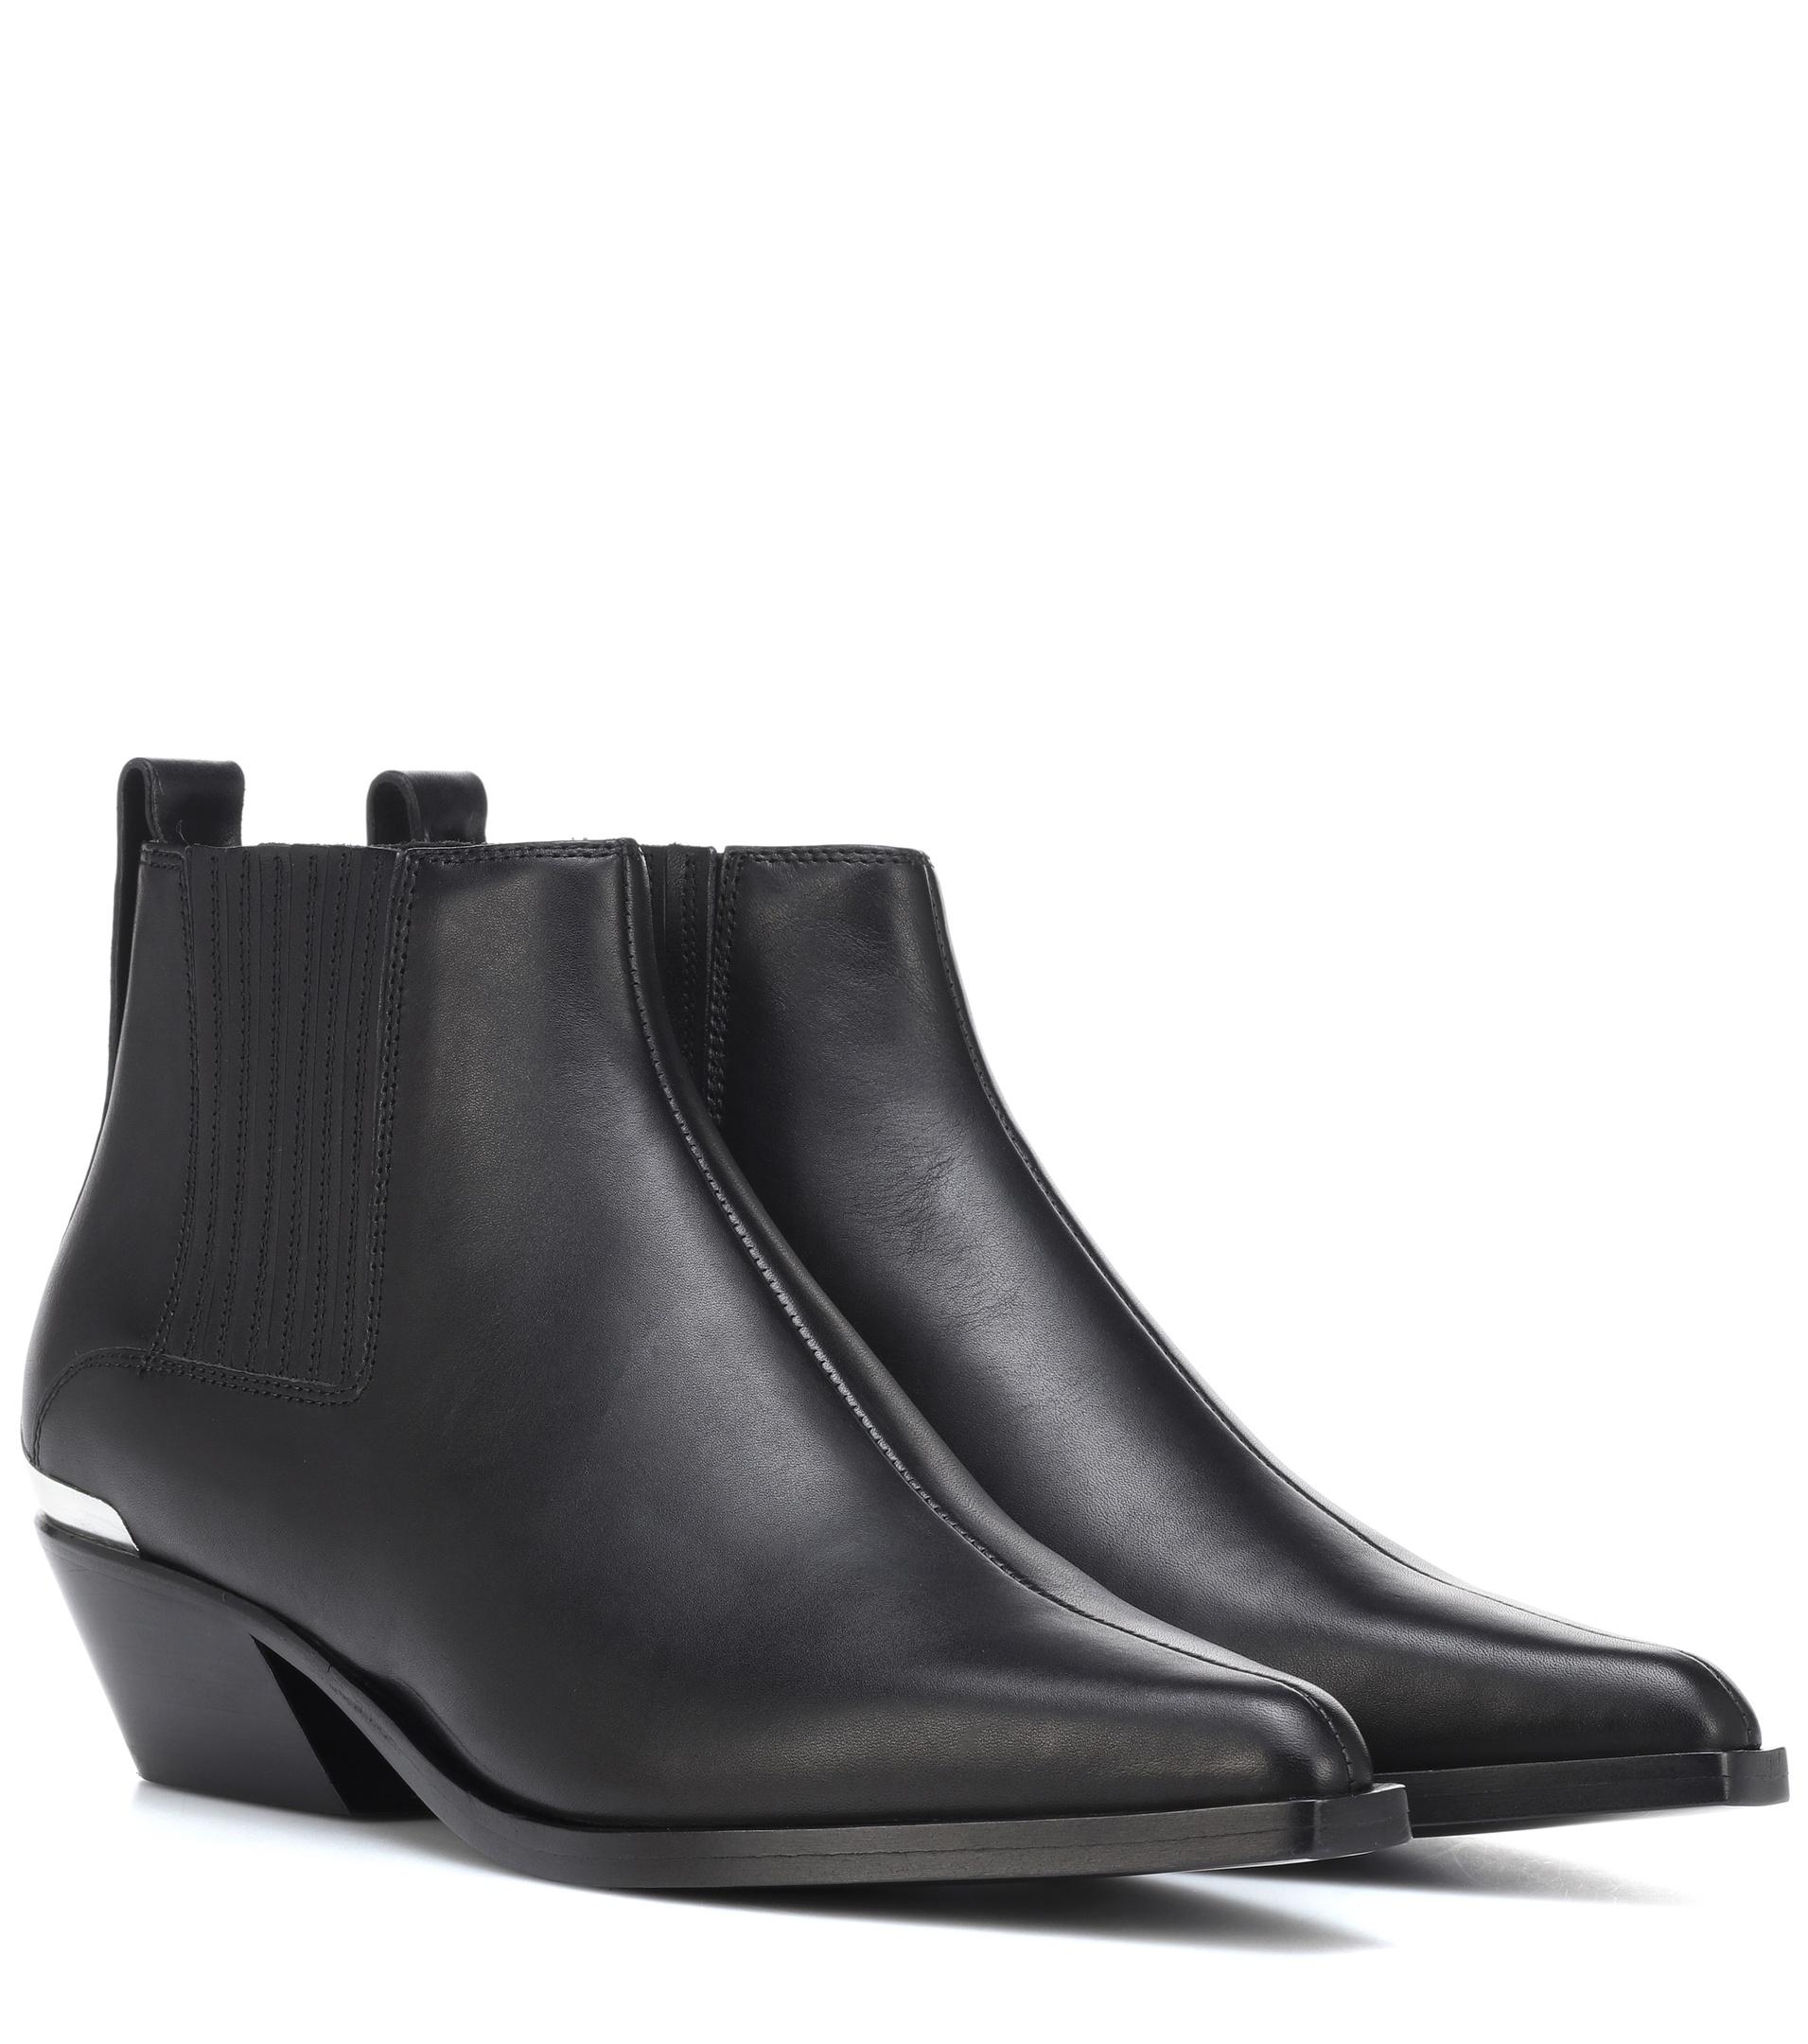 Rag & Bone Westin Leather Ankle Boots in Black - Lyst